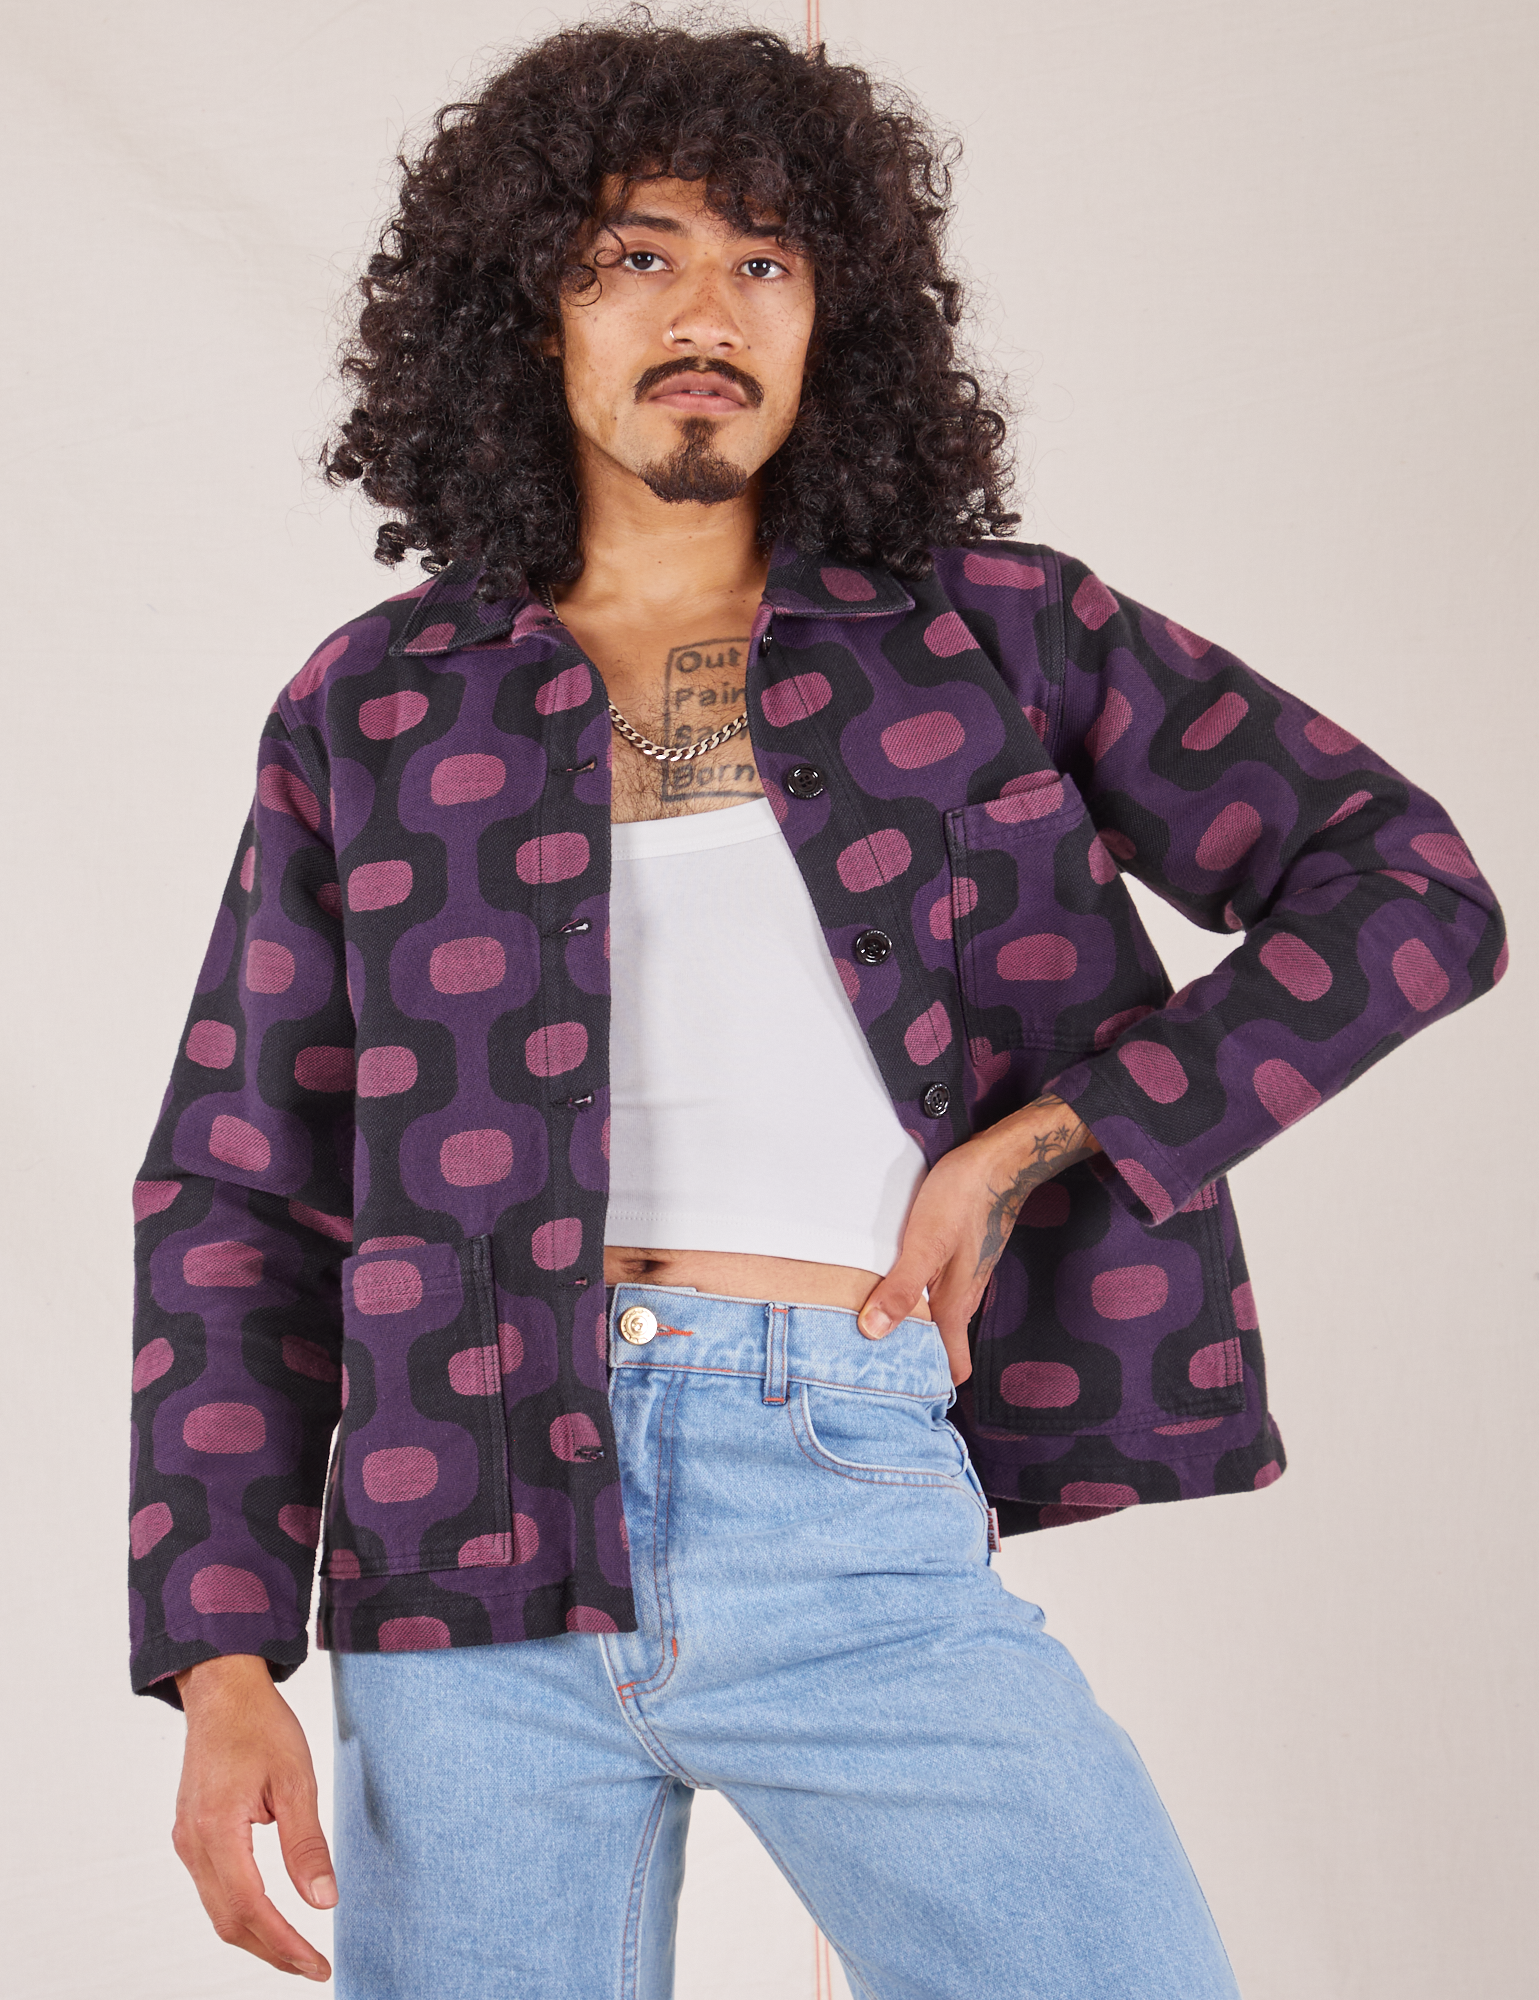 Jesse is 5&#39;8&quot; and wearing XS  Purple Tile Jacquard Work Jacket